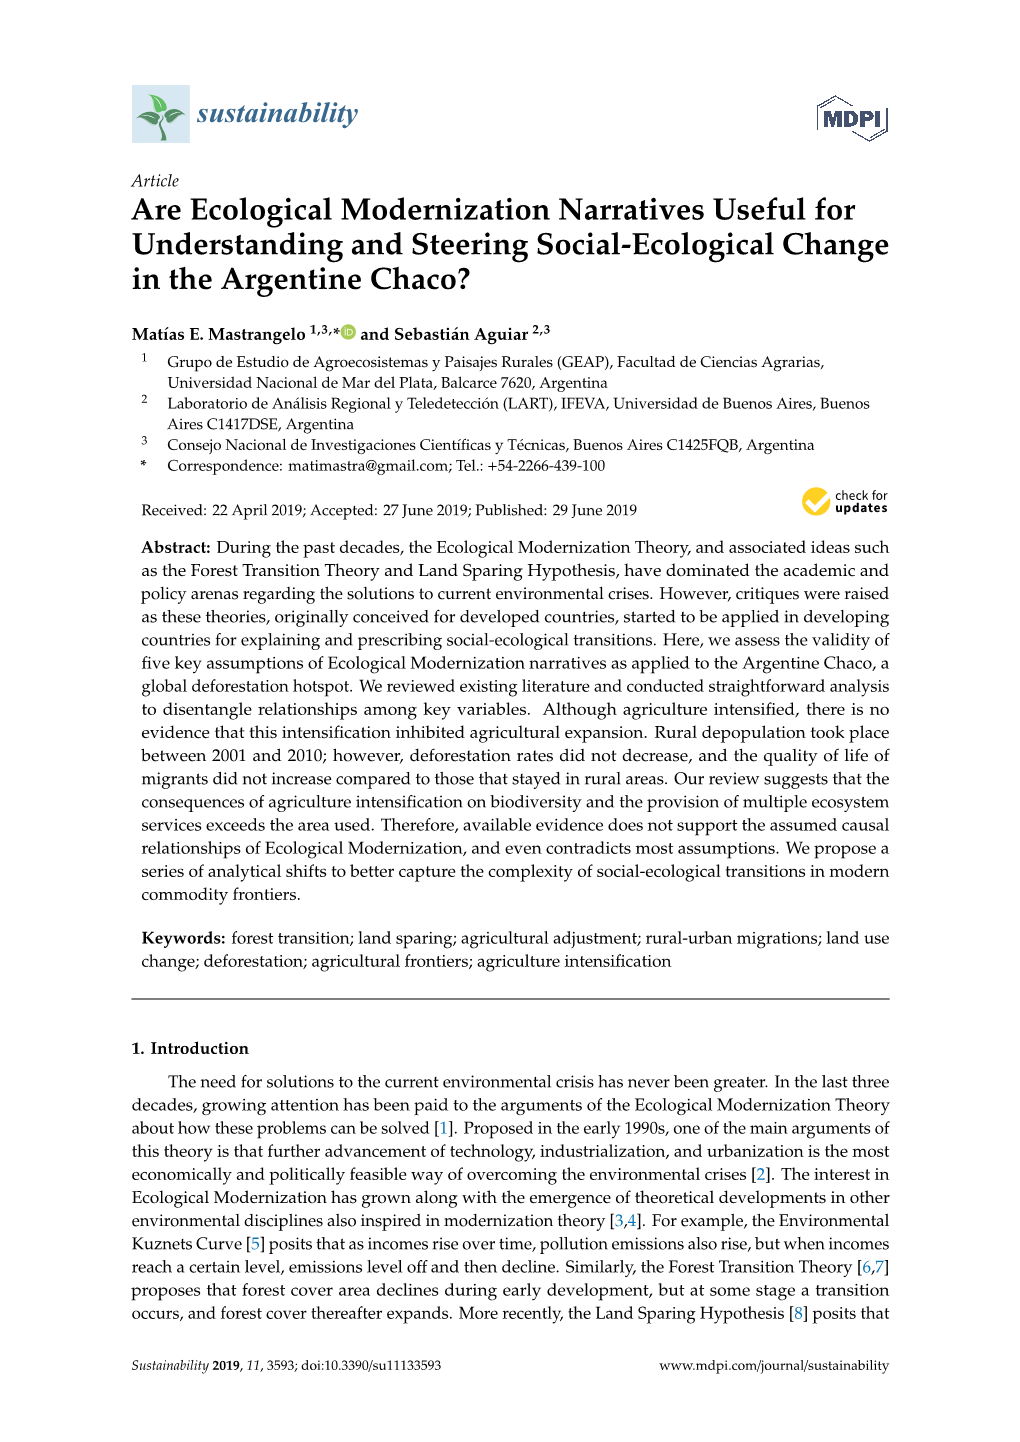 Are Ecological Modernization Narratives Useful for Understanding and Steering Social-Ecological Change in the Argentine Chaco?